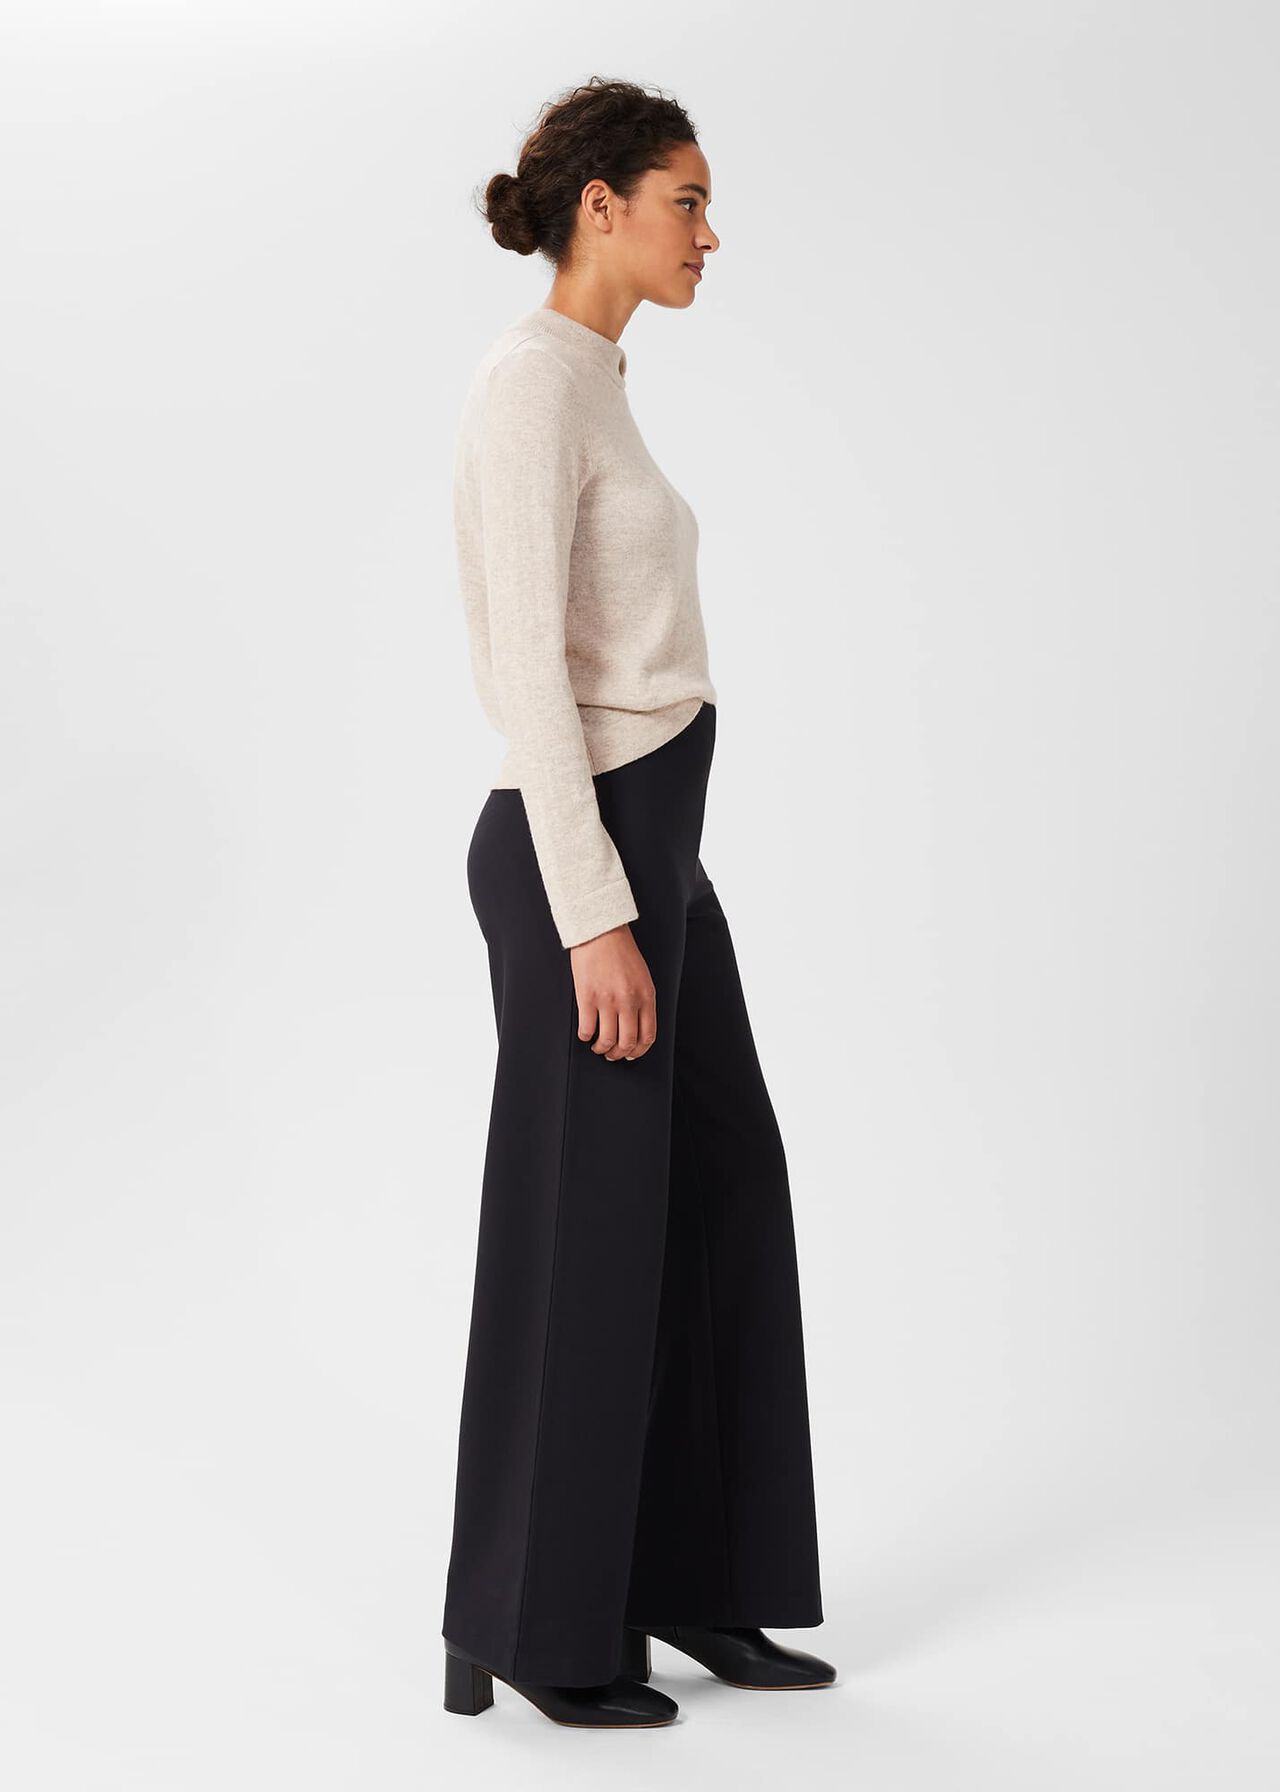 Pippa Jersey Wide Leg Trousers, Navy, hi-res